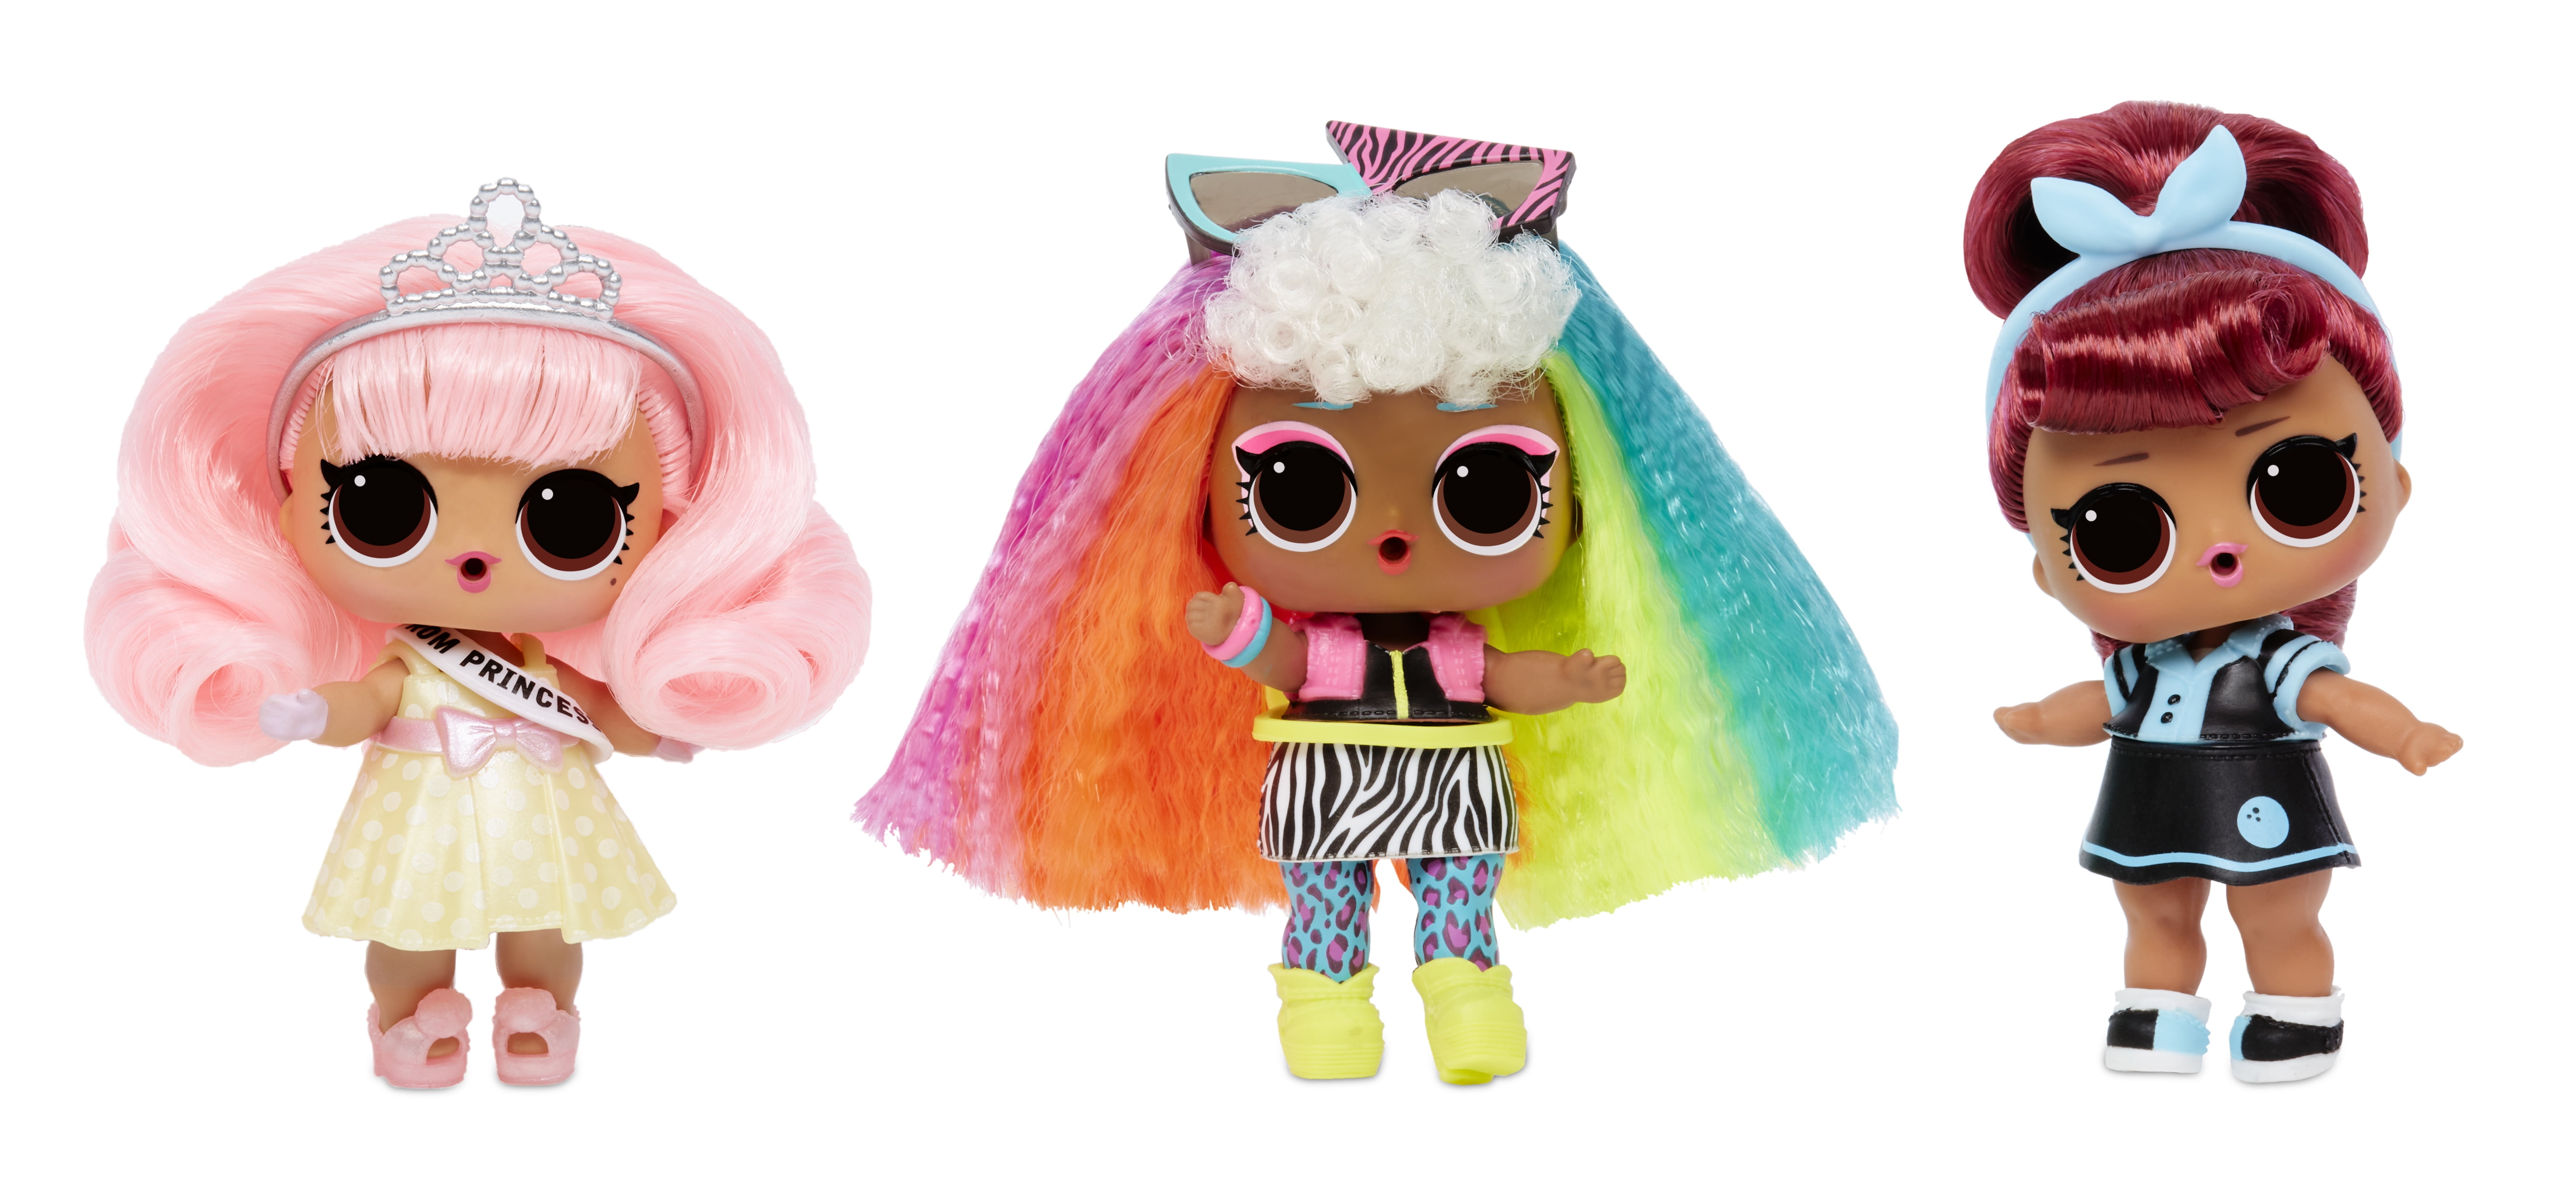 LOL Surprise Doll GLAM GLITTER Series 2 Spice toys Christmas gifts 